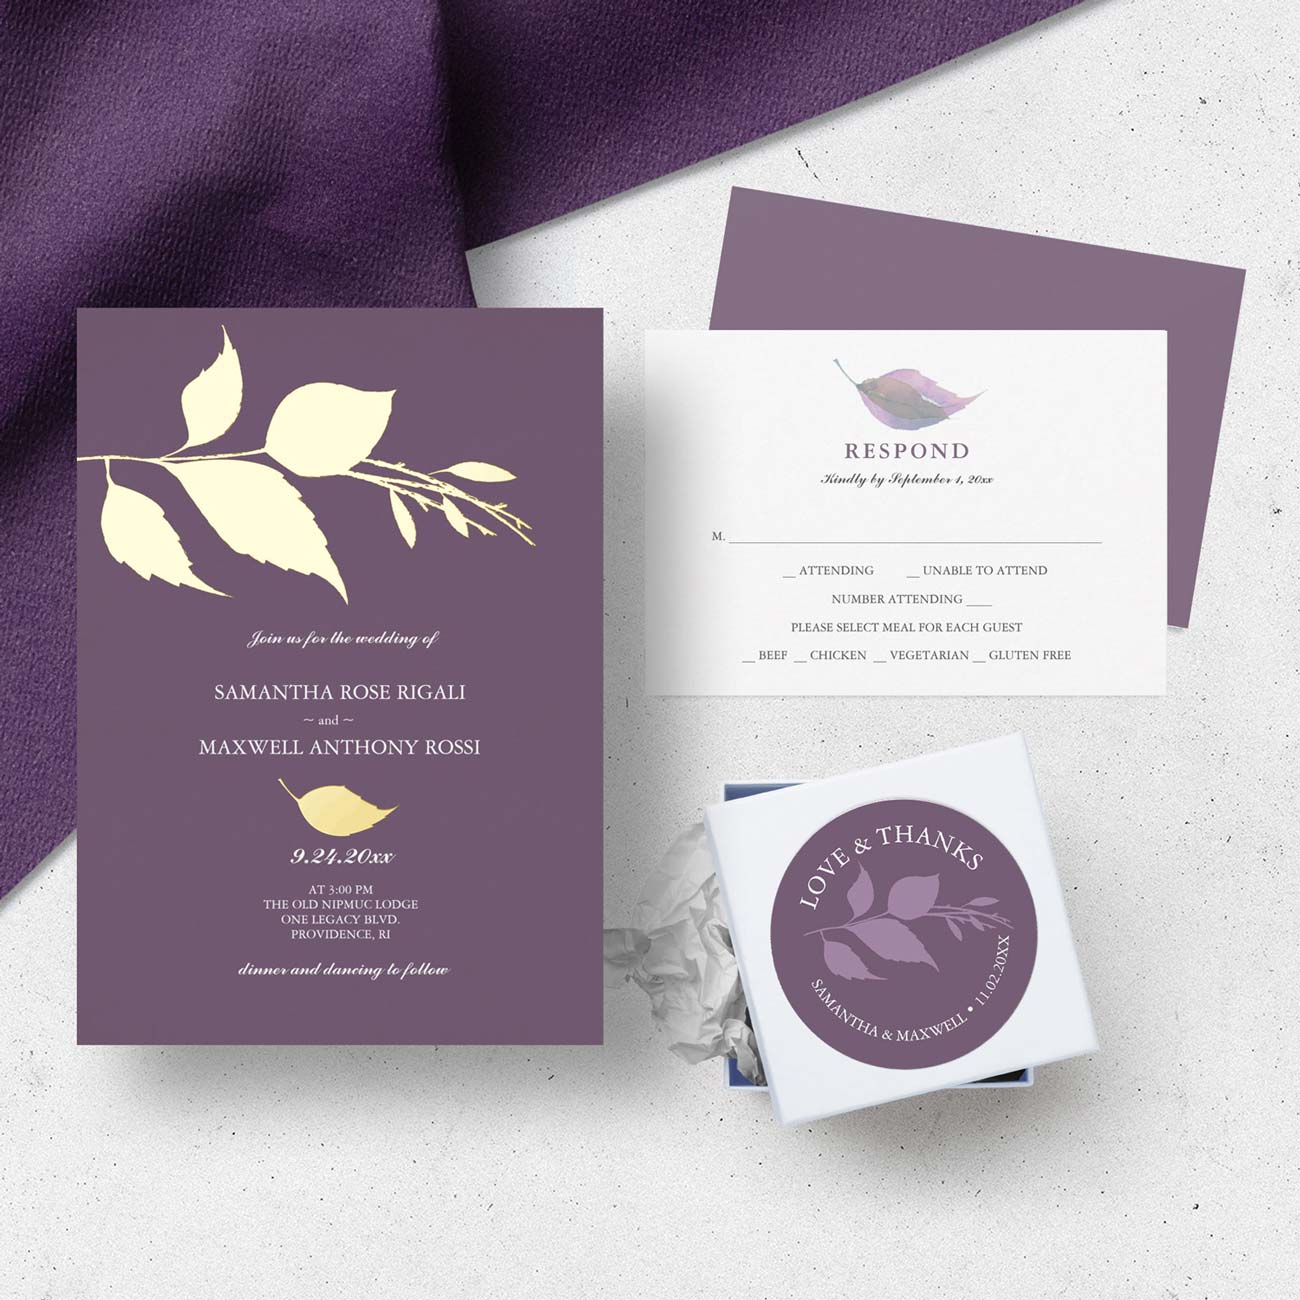 Elegant purple wedding invitation theme features leaf art by Victoria Grigaliunas of Do Tell A Belle. Tap the image to shop the complete line.